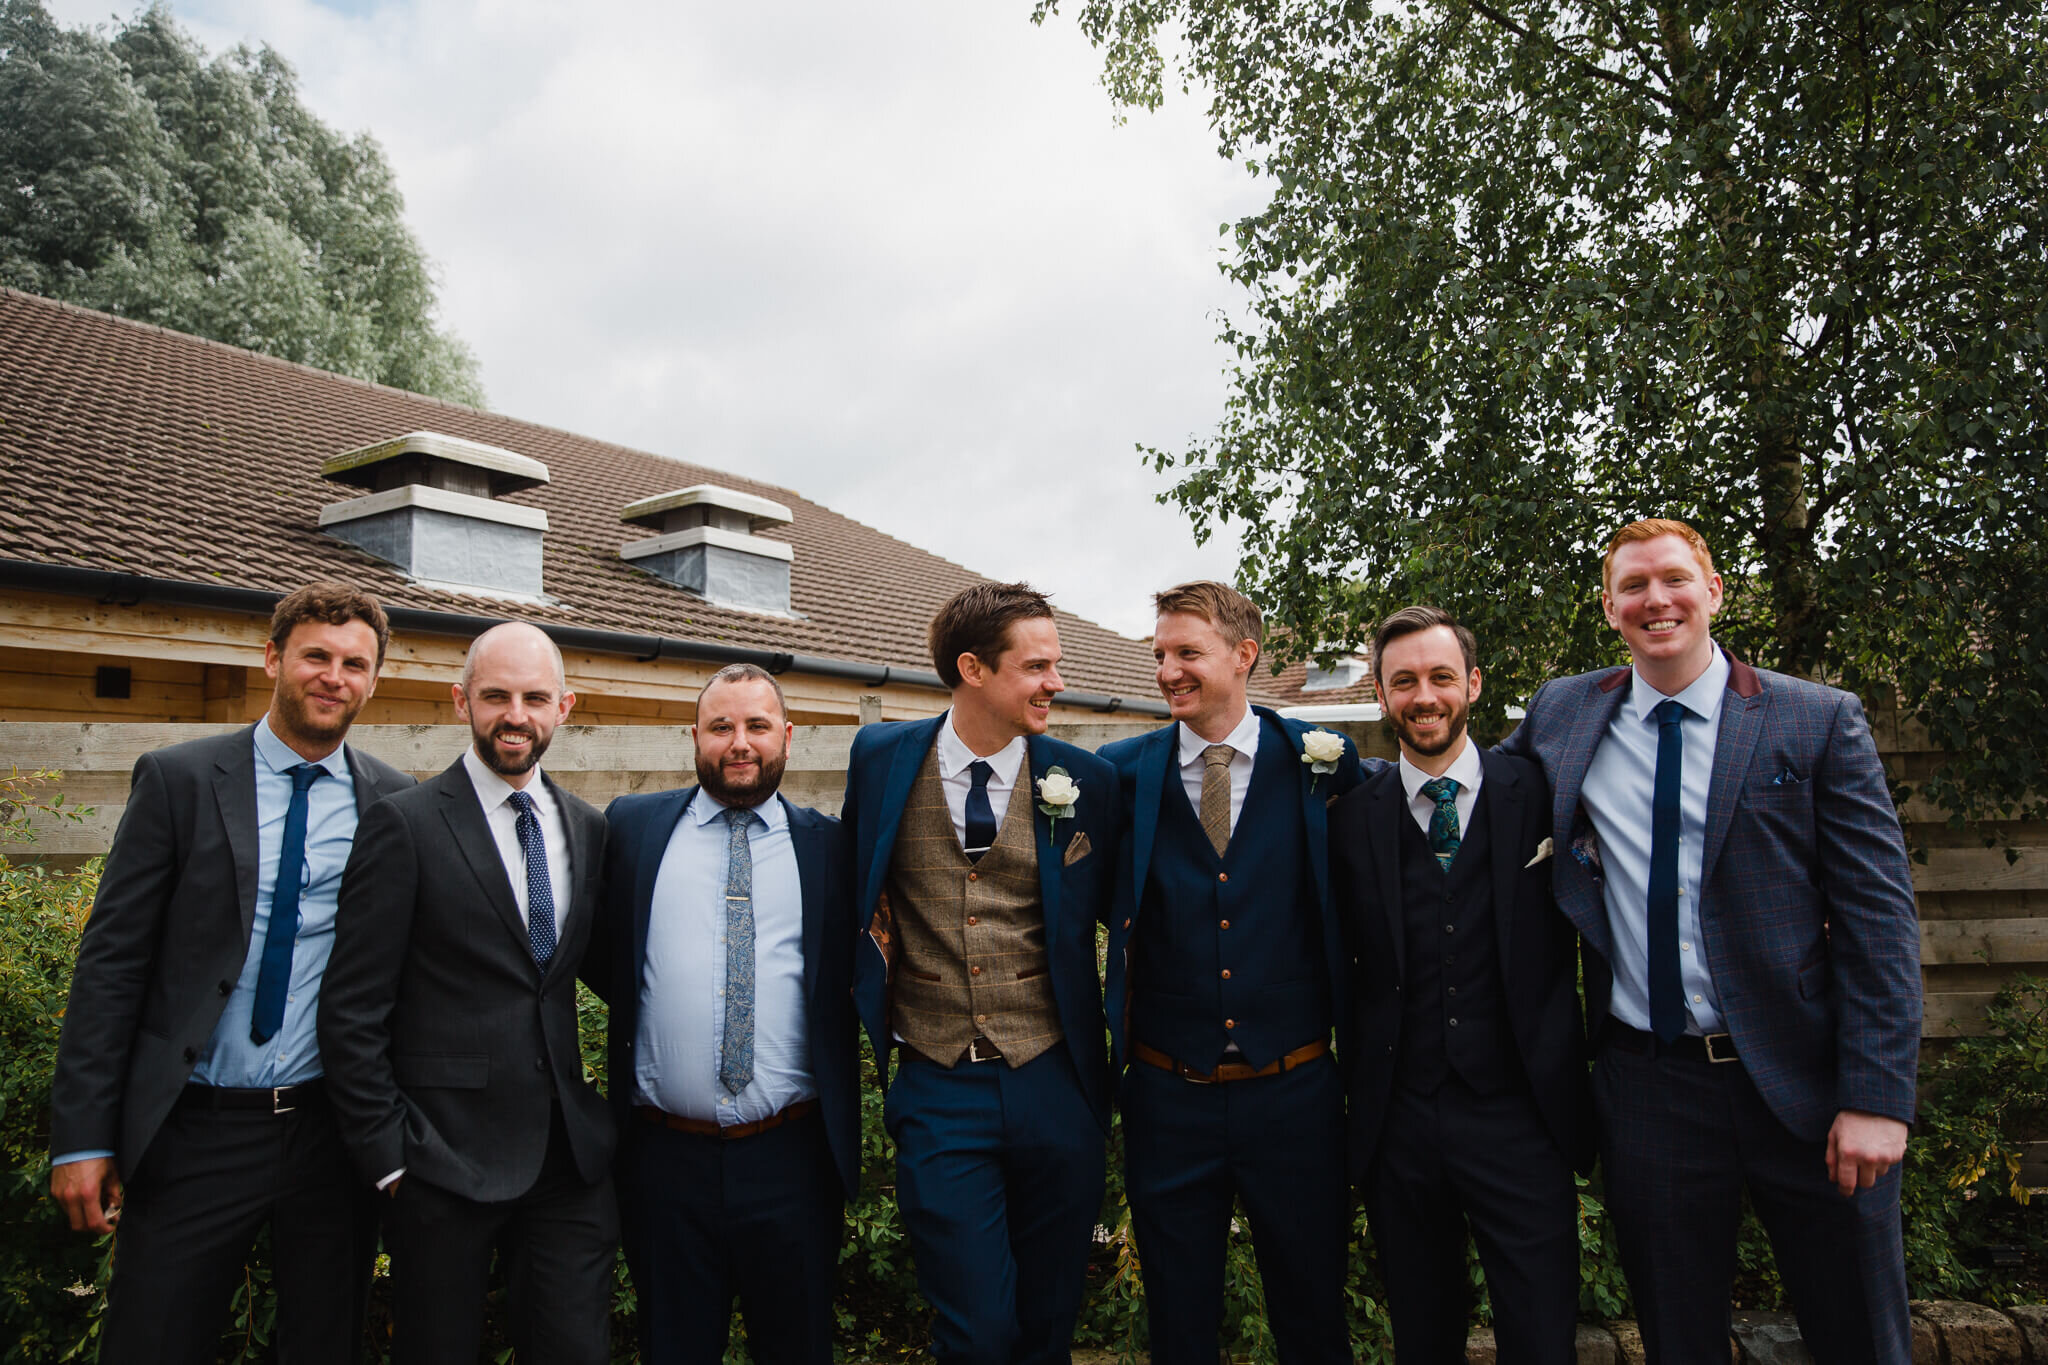 groomsmen line up for portrait together in grounds